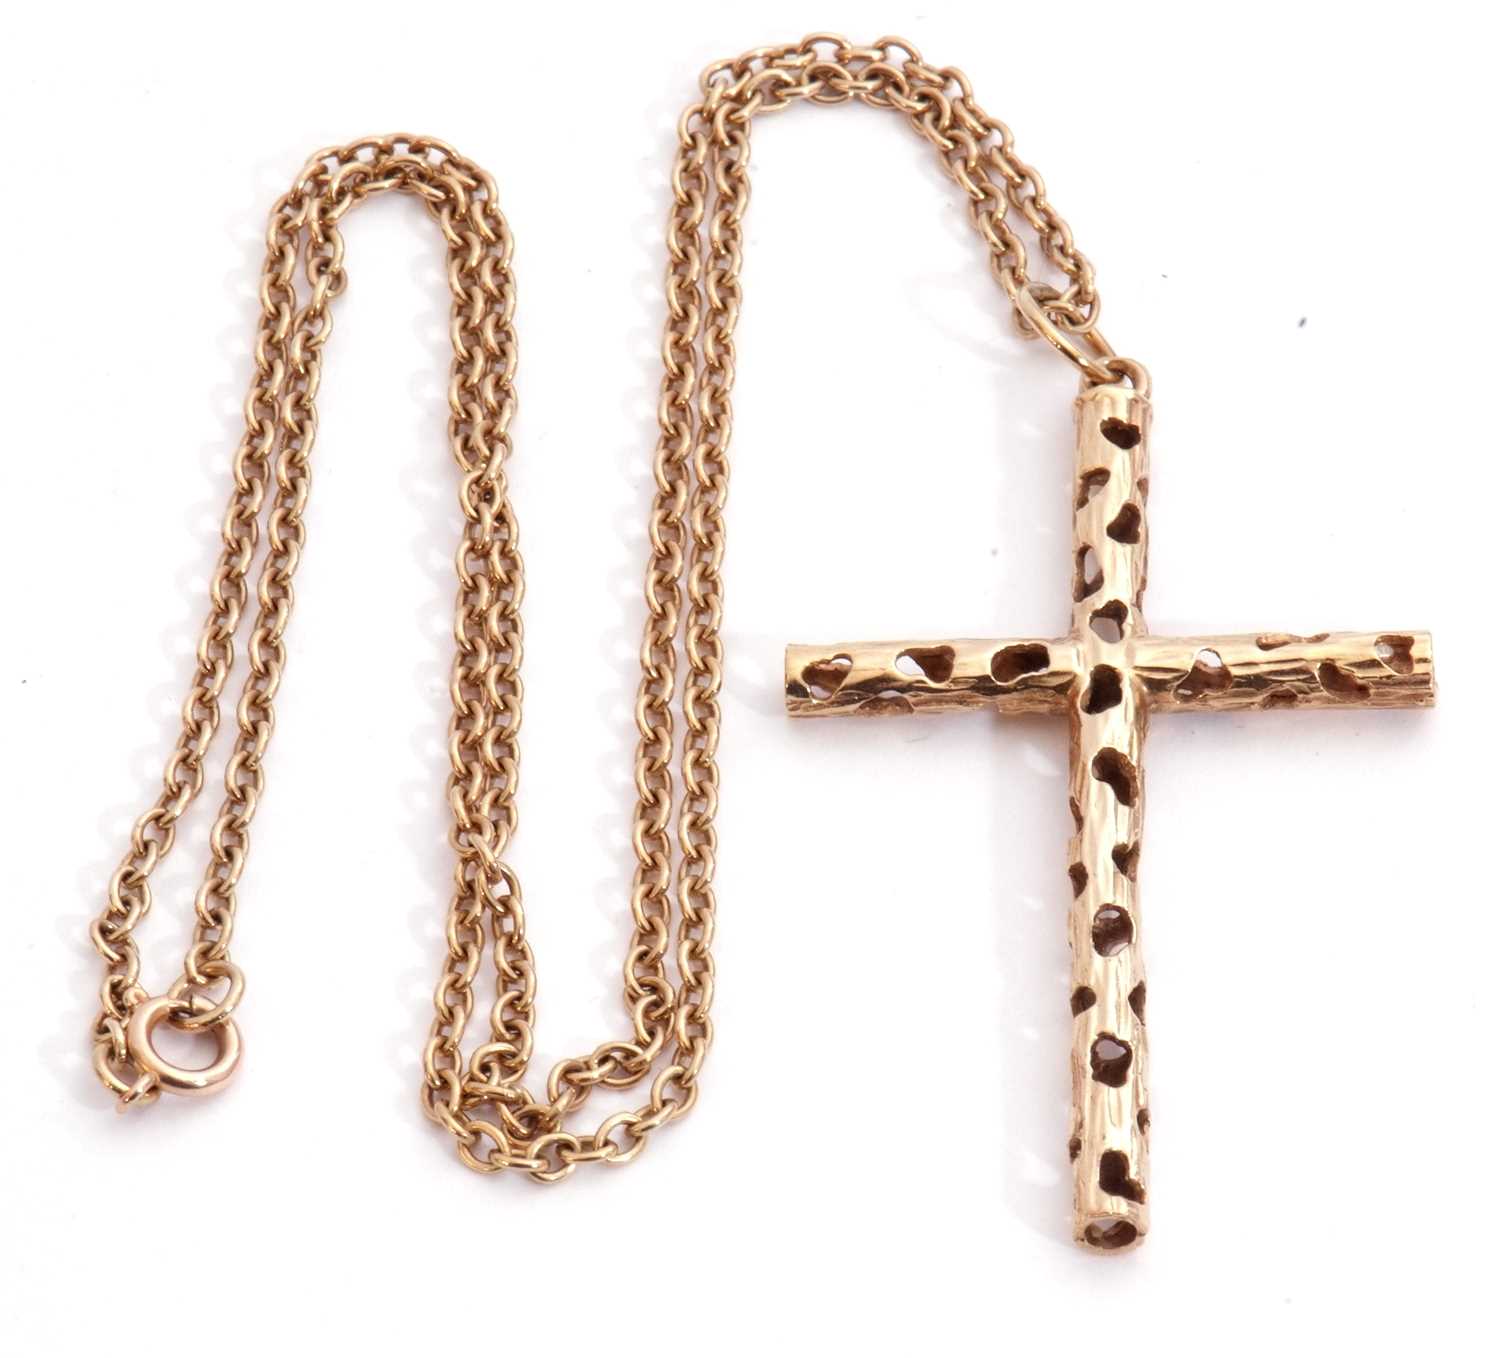 9ct gold cross pendant, a hollow pierced textured design, 5 x 3cm, London 1979, suspended from a